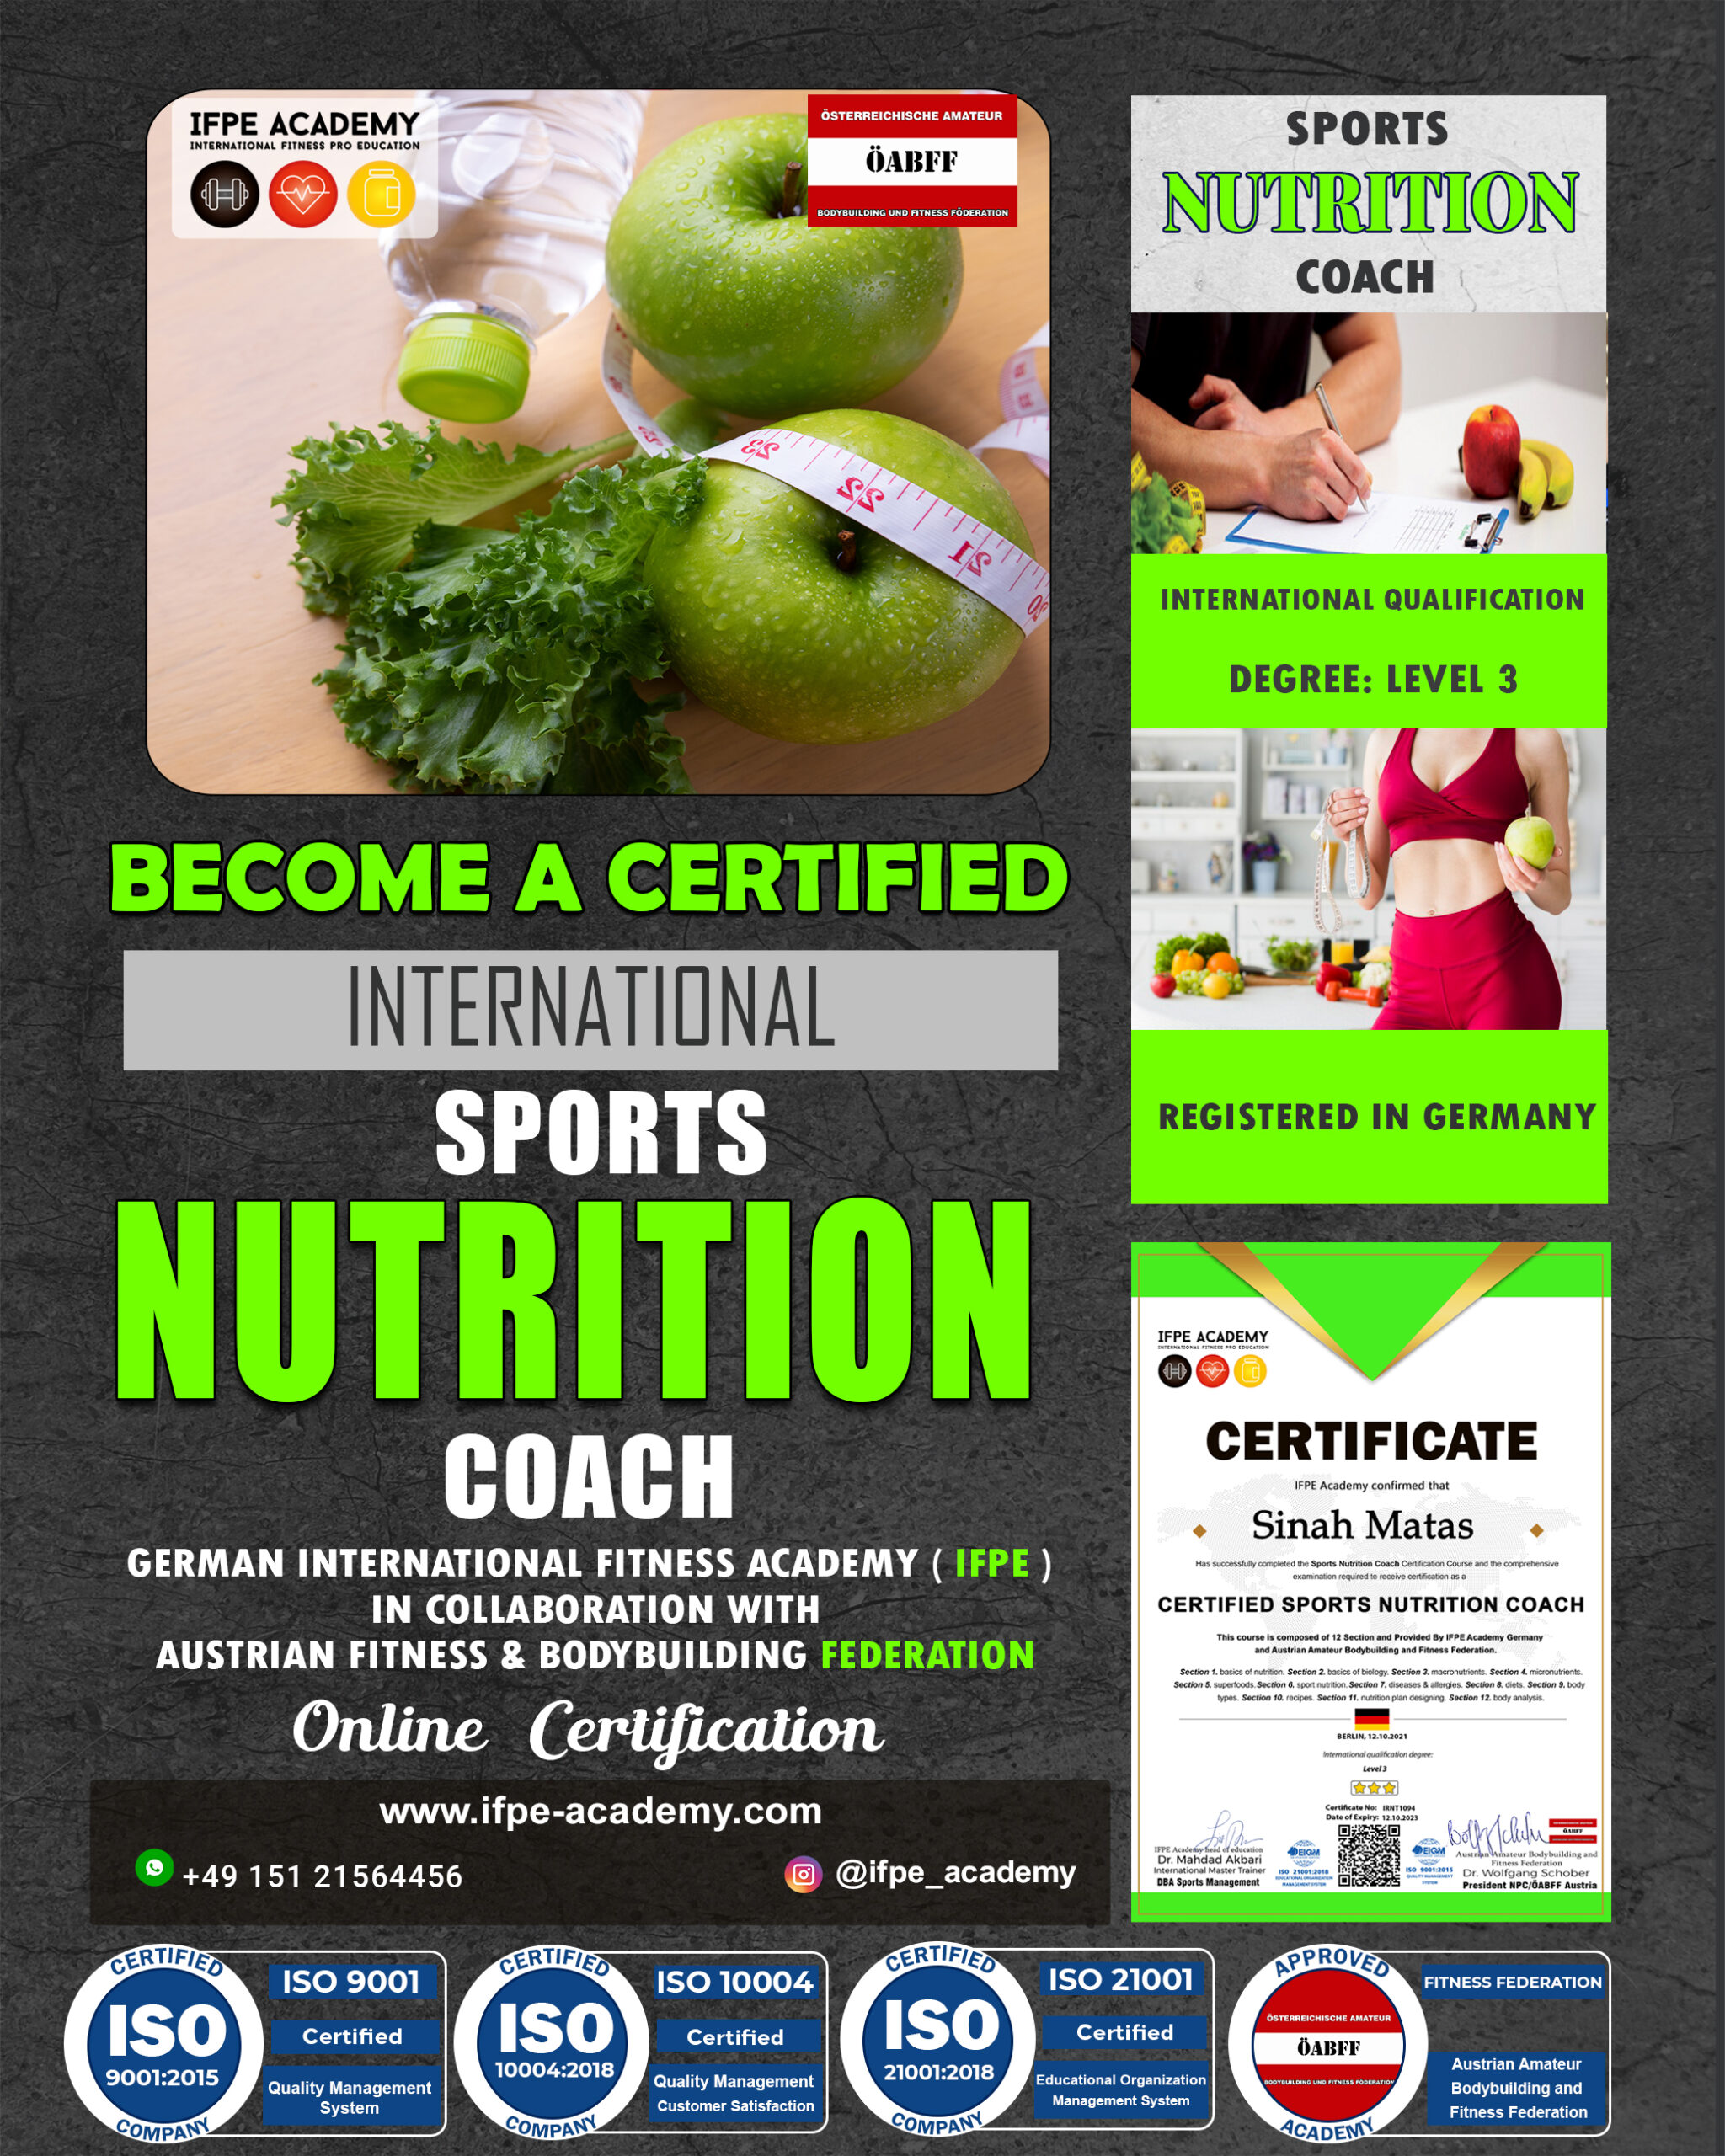 Sports Nutrition Coach - IFPE Academy